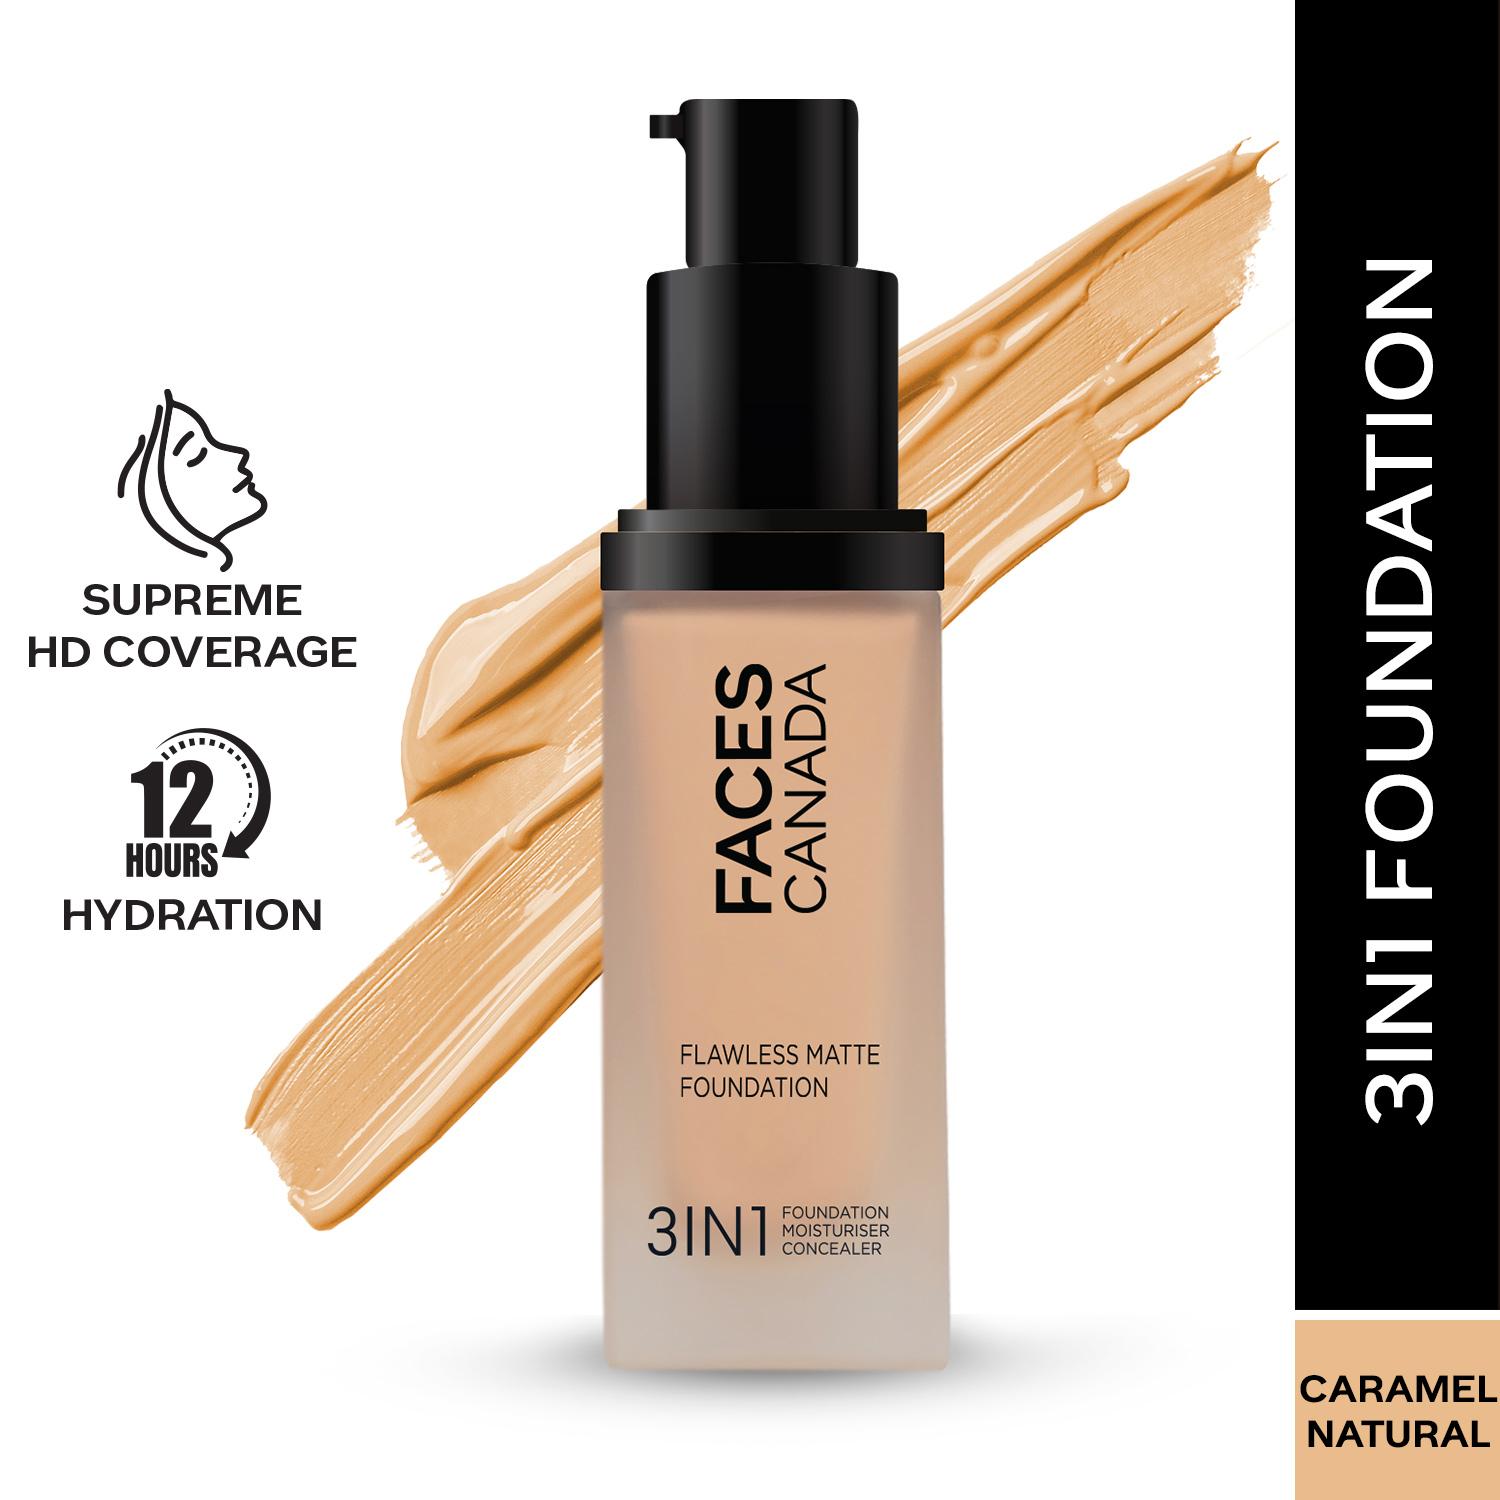 Faces Canada | Faces Canada 3-In-1 Flawless Matte Foundation SPF 18 - 023 Caramel Natural (30ml)